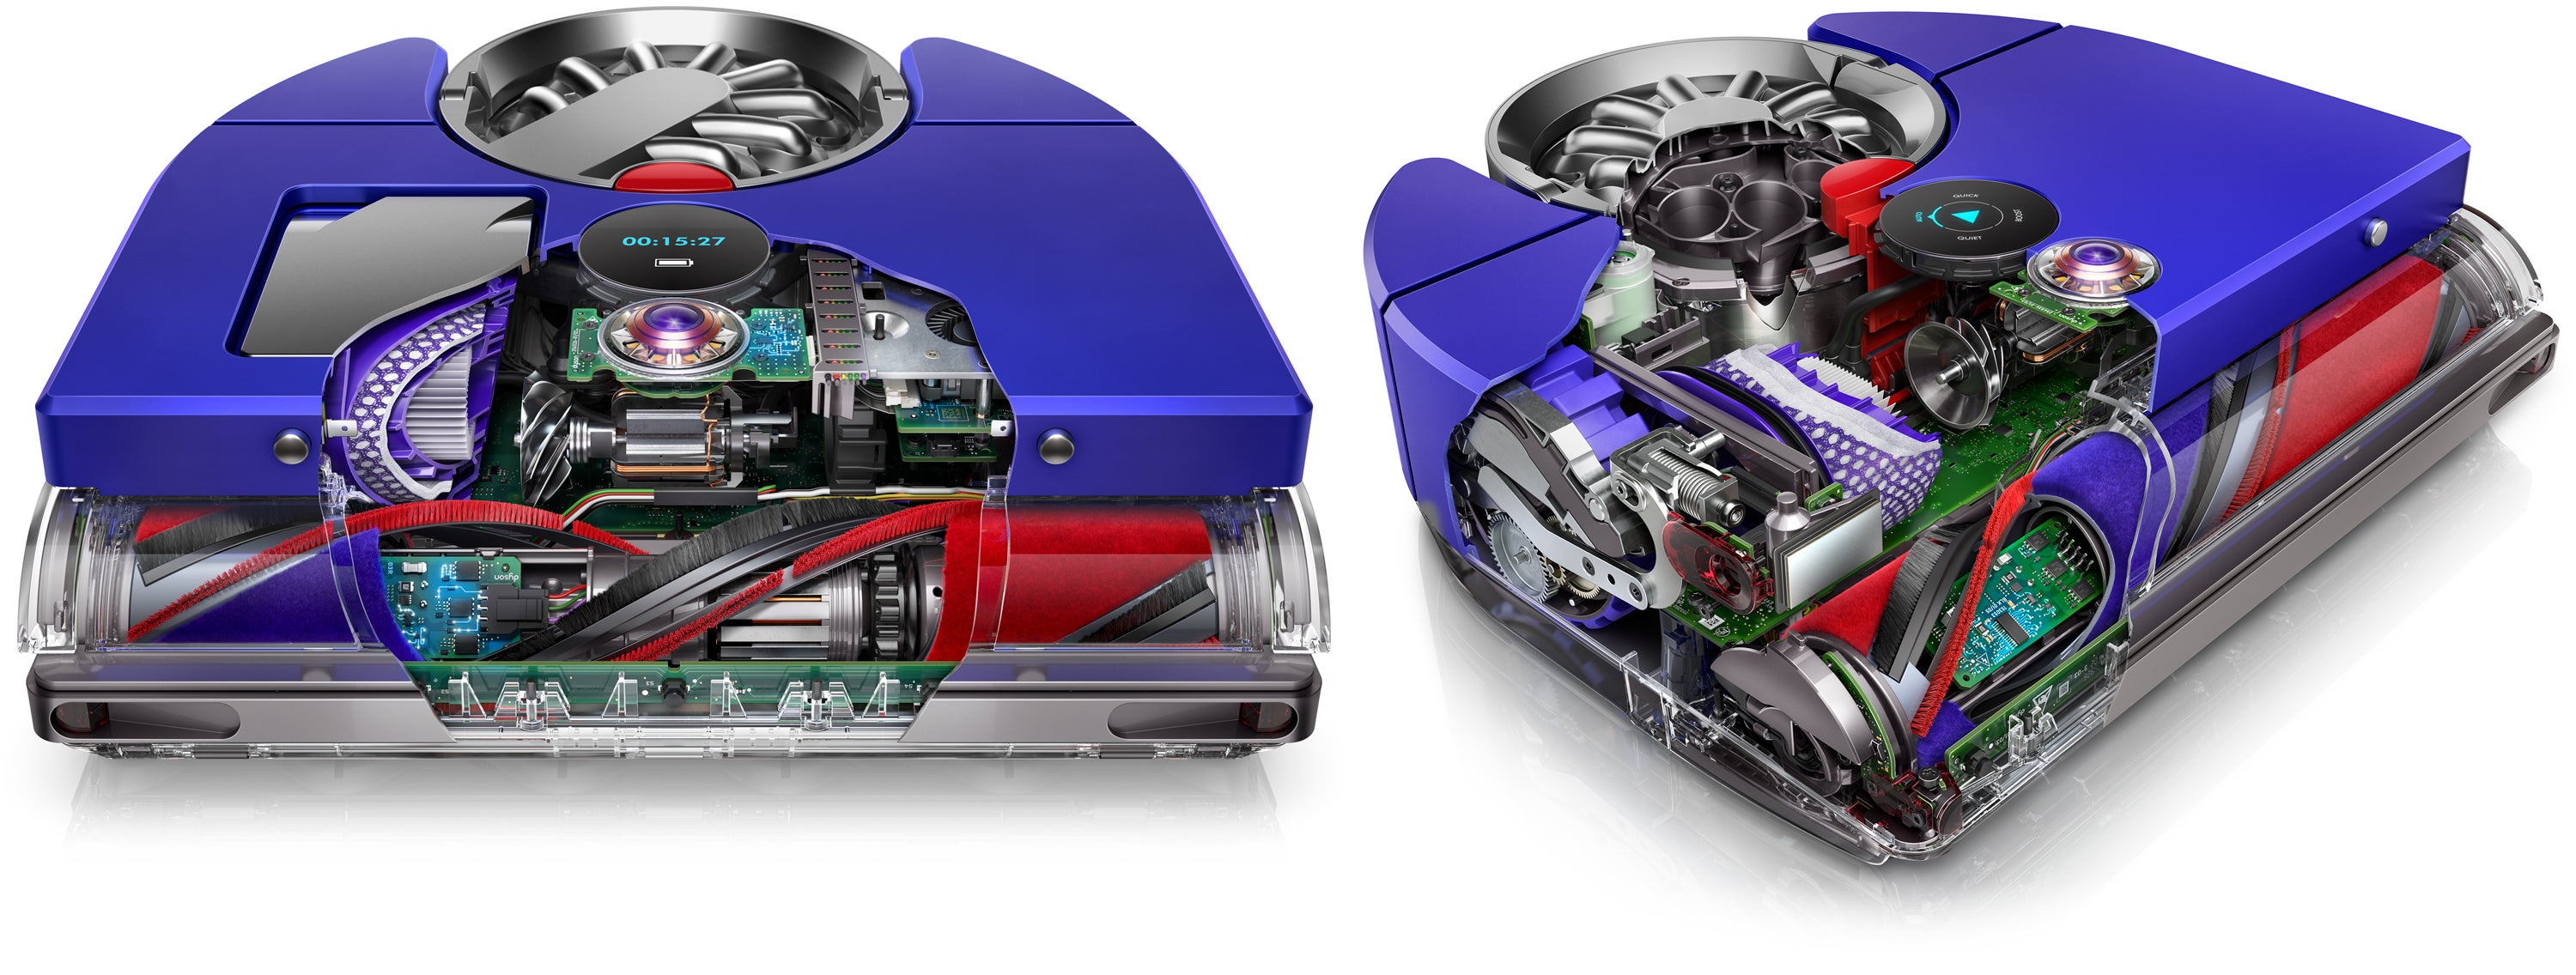 Two images of the Dyson 360 Vis Nav taken from different angles with sections cut out to reveal the internal components.